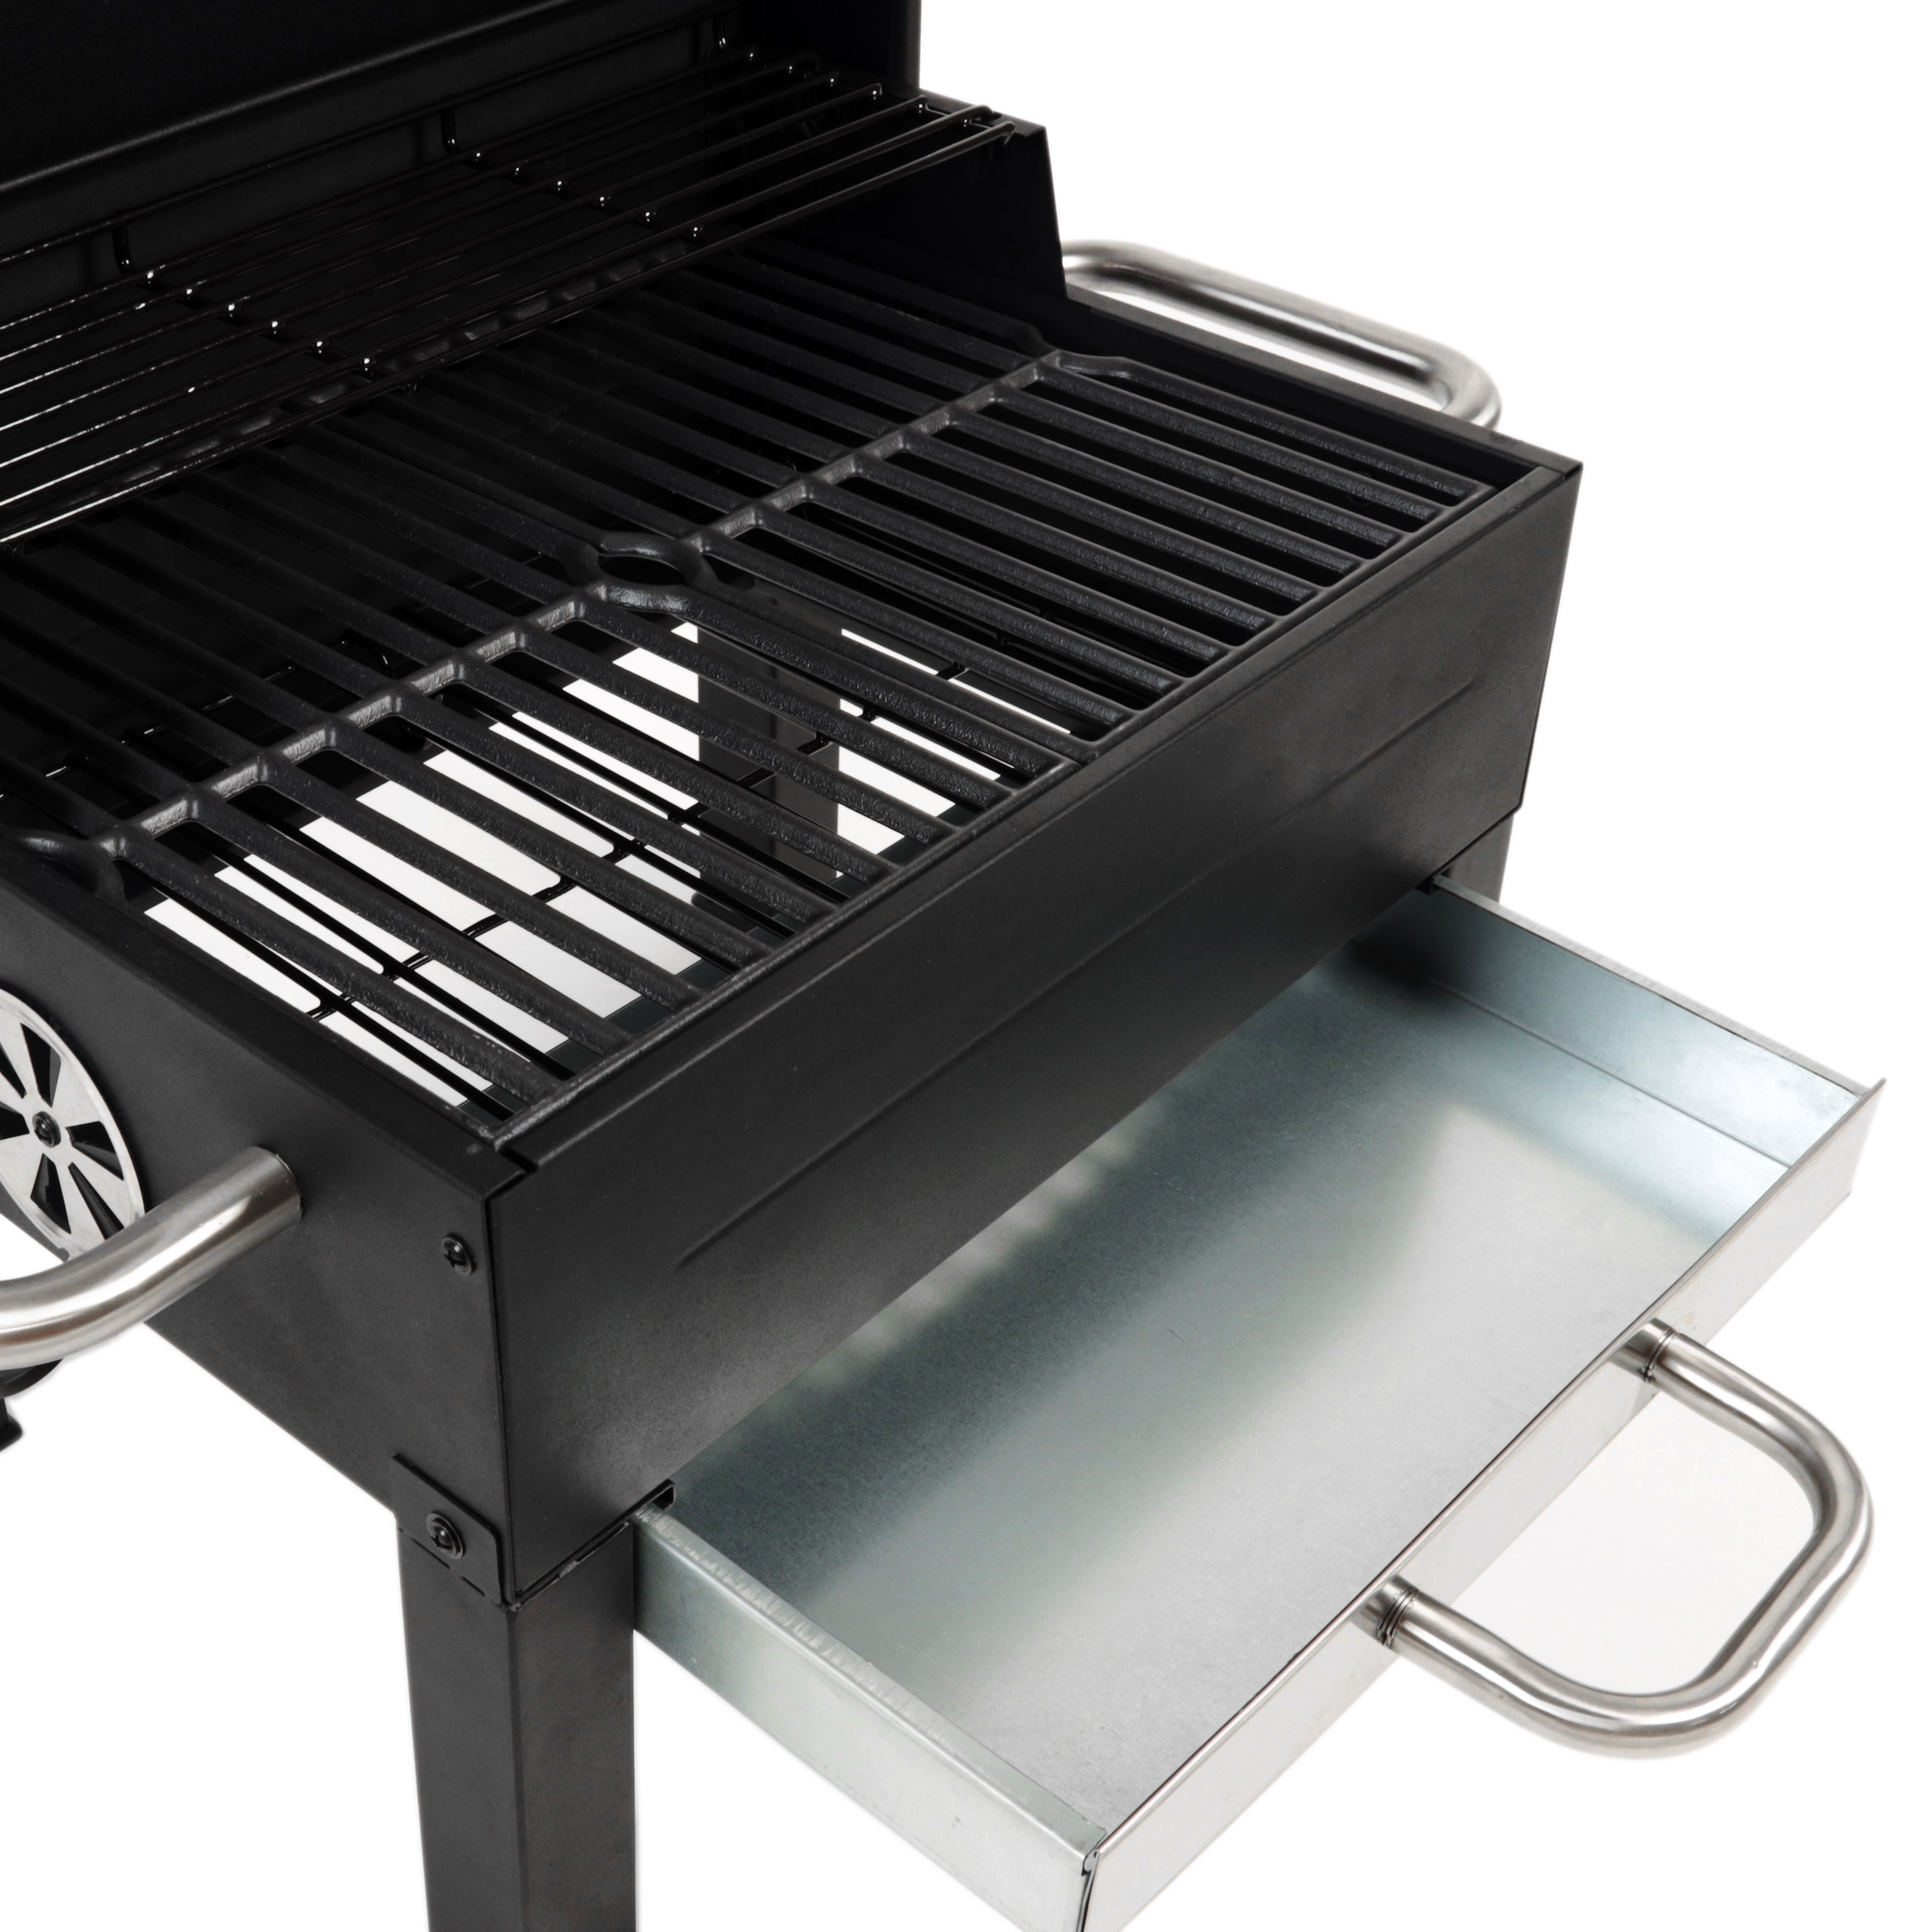 Expert Grill Premium Portable Charcoal Grill, Black and Stainless Steel - image 14 of 18